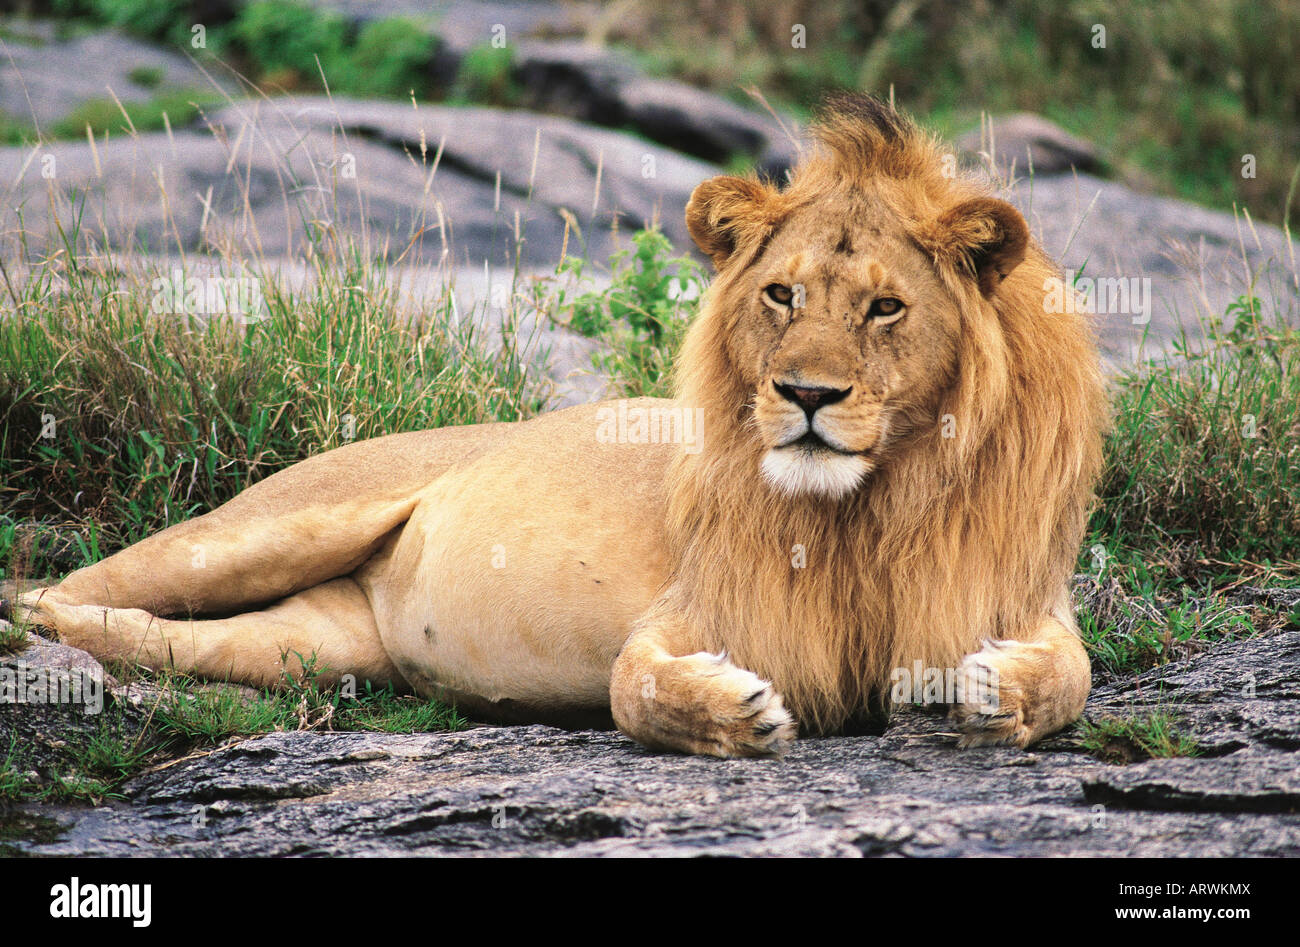 Fine golden haired well fed Male Lion with gold mane relaxing in Serengeti National Park Tanzania East Africa Stock Photo